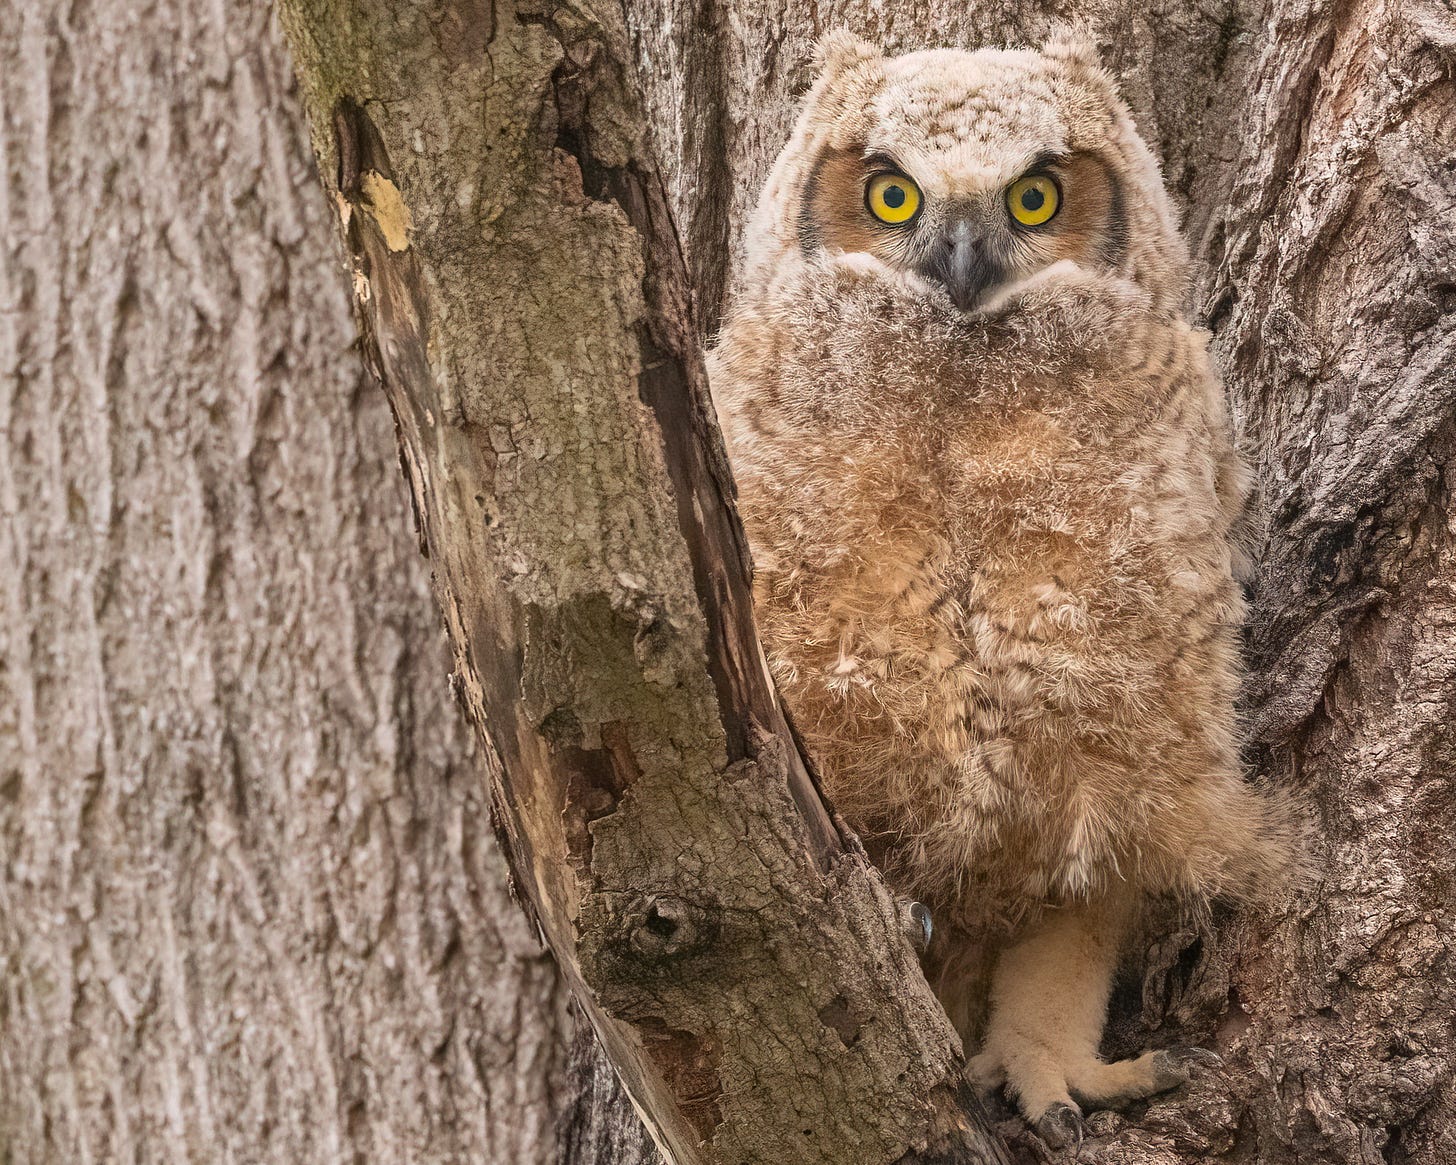 The baby owl is sitting in the crook of a tree, where a branch meets the trunk. Her feathers are much more brown at this point, and her facial disc shows around her eyes. Her bright yellow eyes stare ahead into the camera. Her legs and feet are also covered in fuzzy feathers.